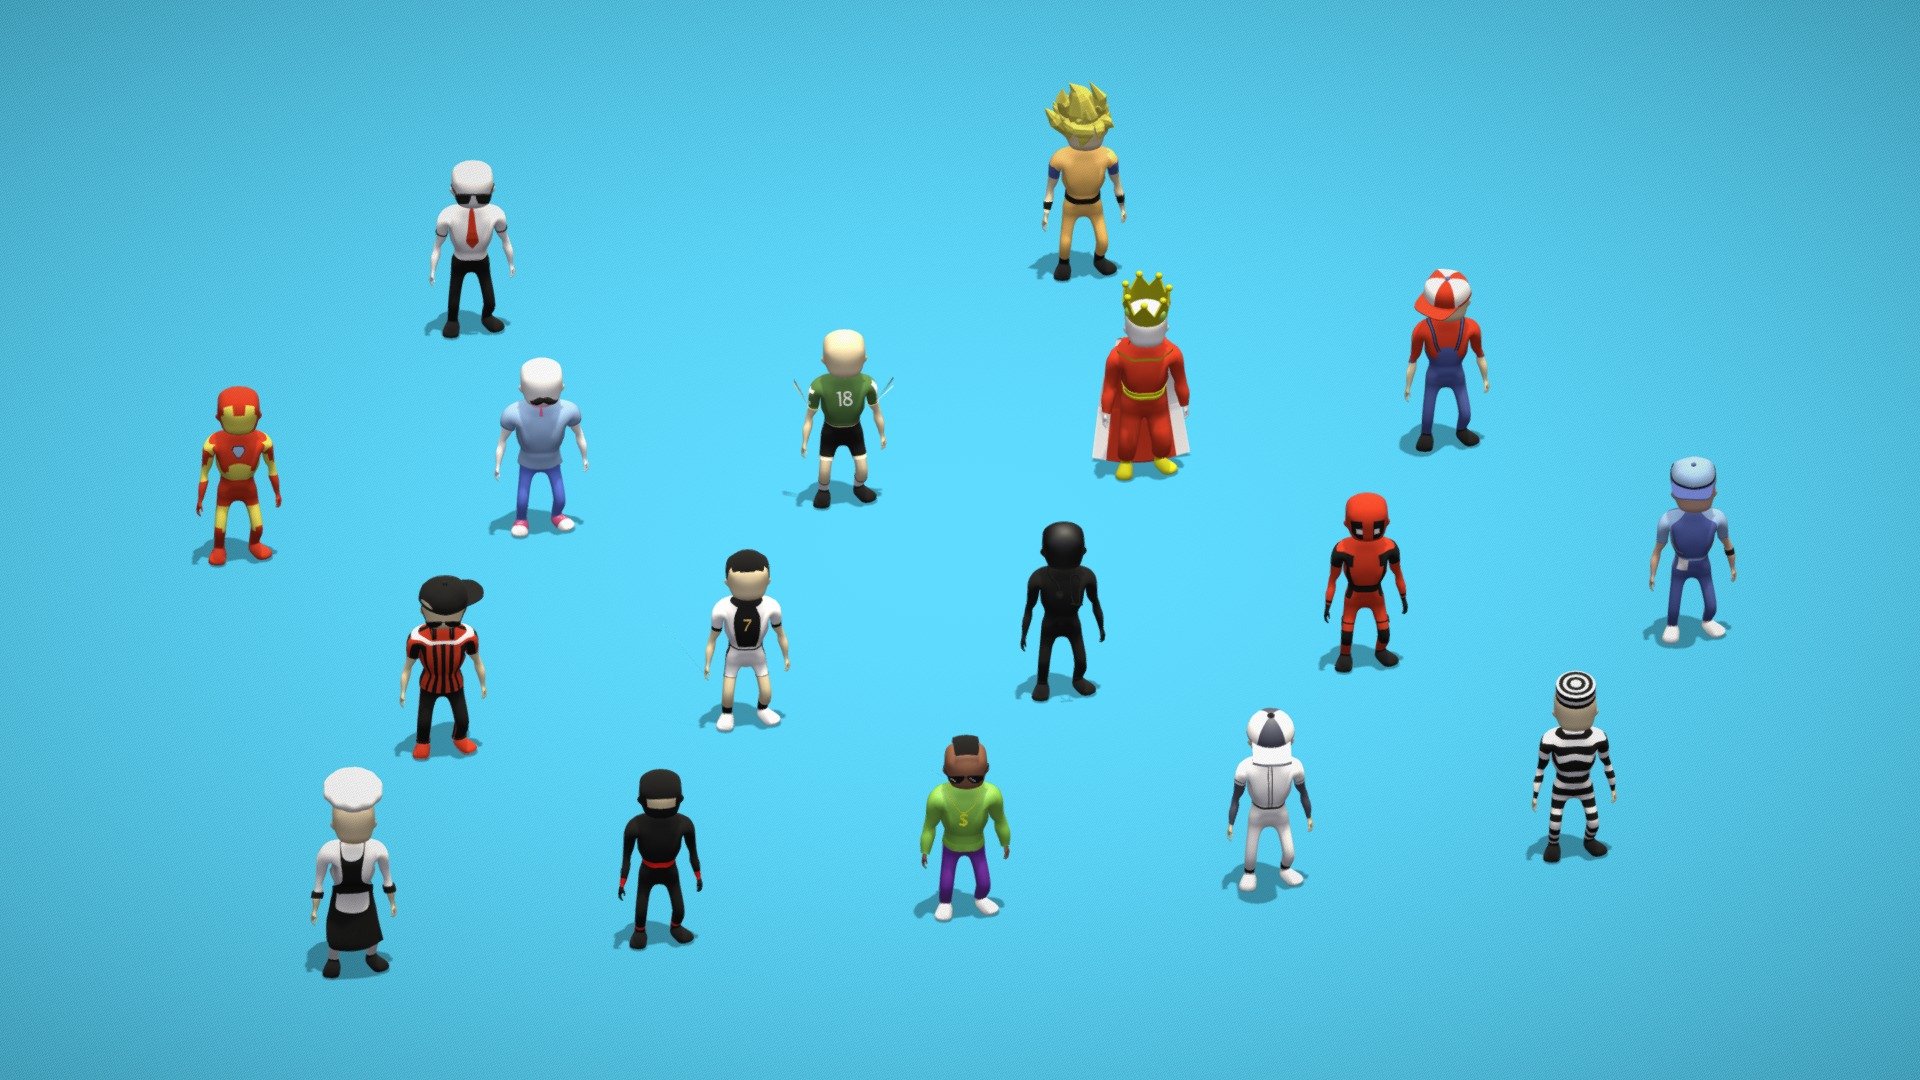 Presenting Hyper Casual - Stickman Characters
Pack includes hyper-casual stickman characters in a variety of 17 different characters.
A low-poly set of character resources for creating games in the Hyper Casual genre.
All characters have the mixamo Rig and Idle Animation.

You can also rig and animate the model on your own or also change the animations directly in mixamo. You can make color variants by changing their material colors.

Characters Included: Football Player, Thief, Rockstar, Doctor, Rugby Player, Cricketer, Chef, Dancer, Goku, Spy Agent, Deadpool, Ironman, etc. 

Grab this character pack for your game or any other purposes at a very budget-friendly price rate. Please like and give valuable comments for this pack. Thank You 3d model